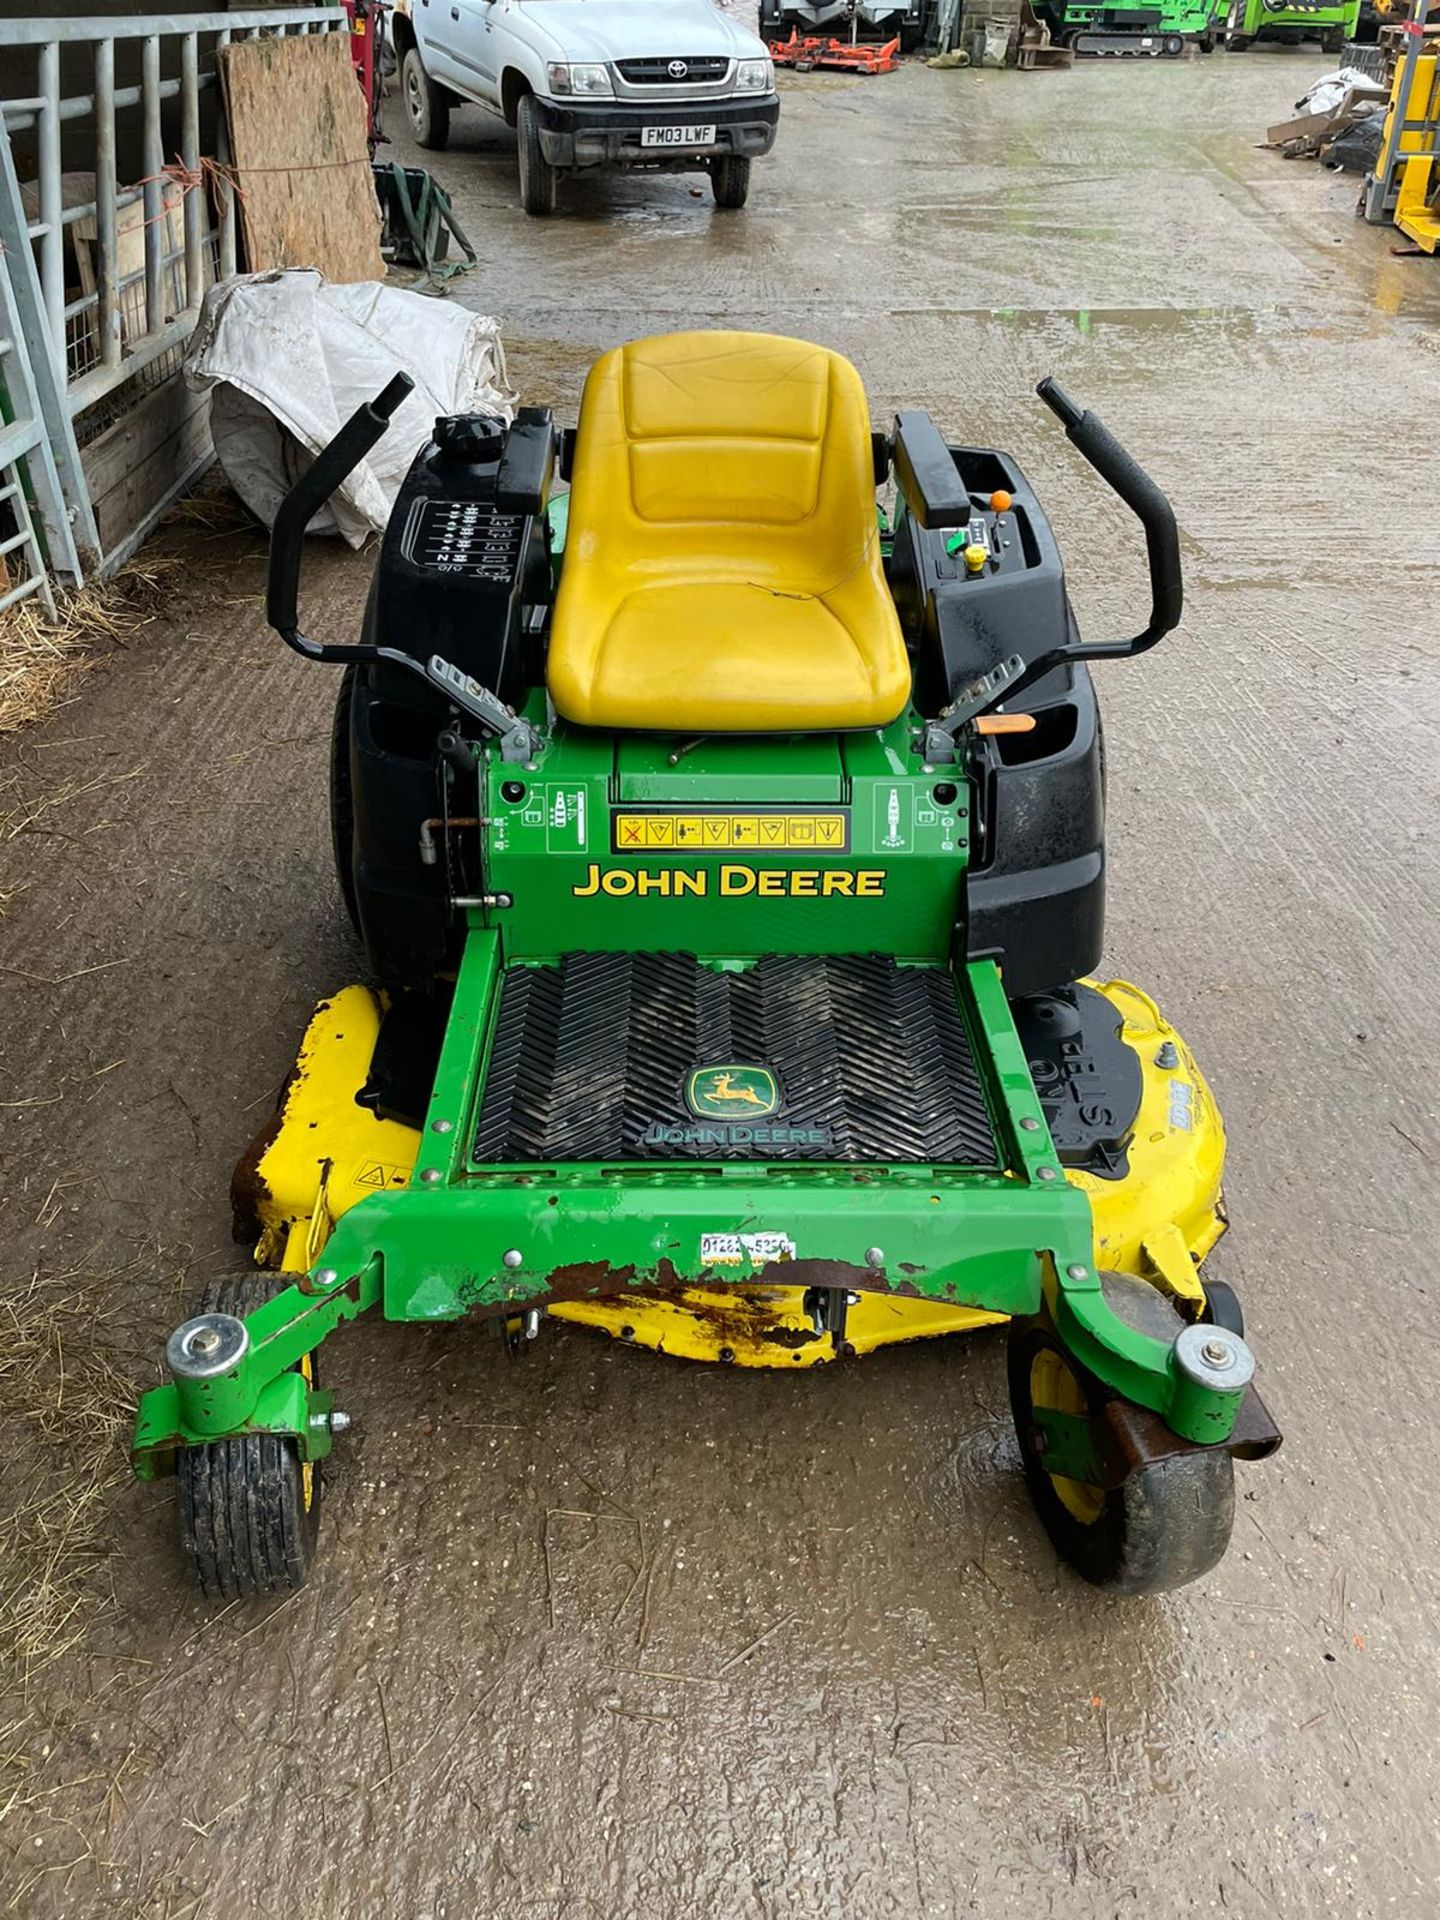 2014 JOHN DEERE Z435 ZERO TURN MOWER, SOLD NEW IN 2015, RUNS, DRIVES AND CUTS, GOOD CONDITION - Image 2 of 8